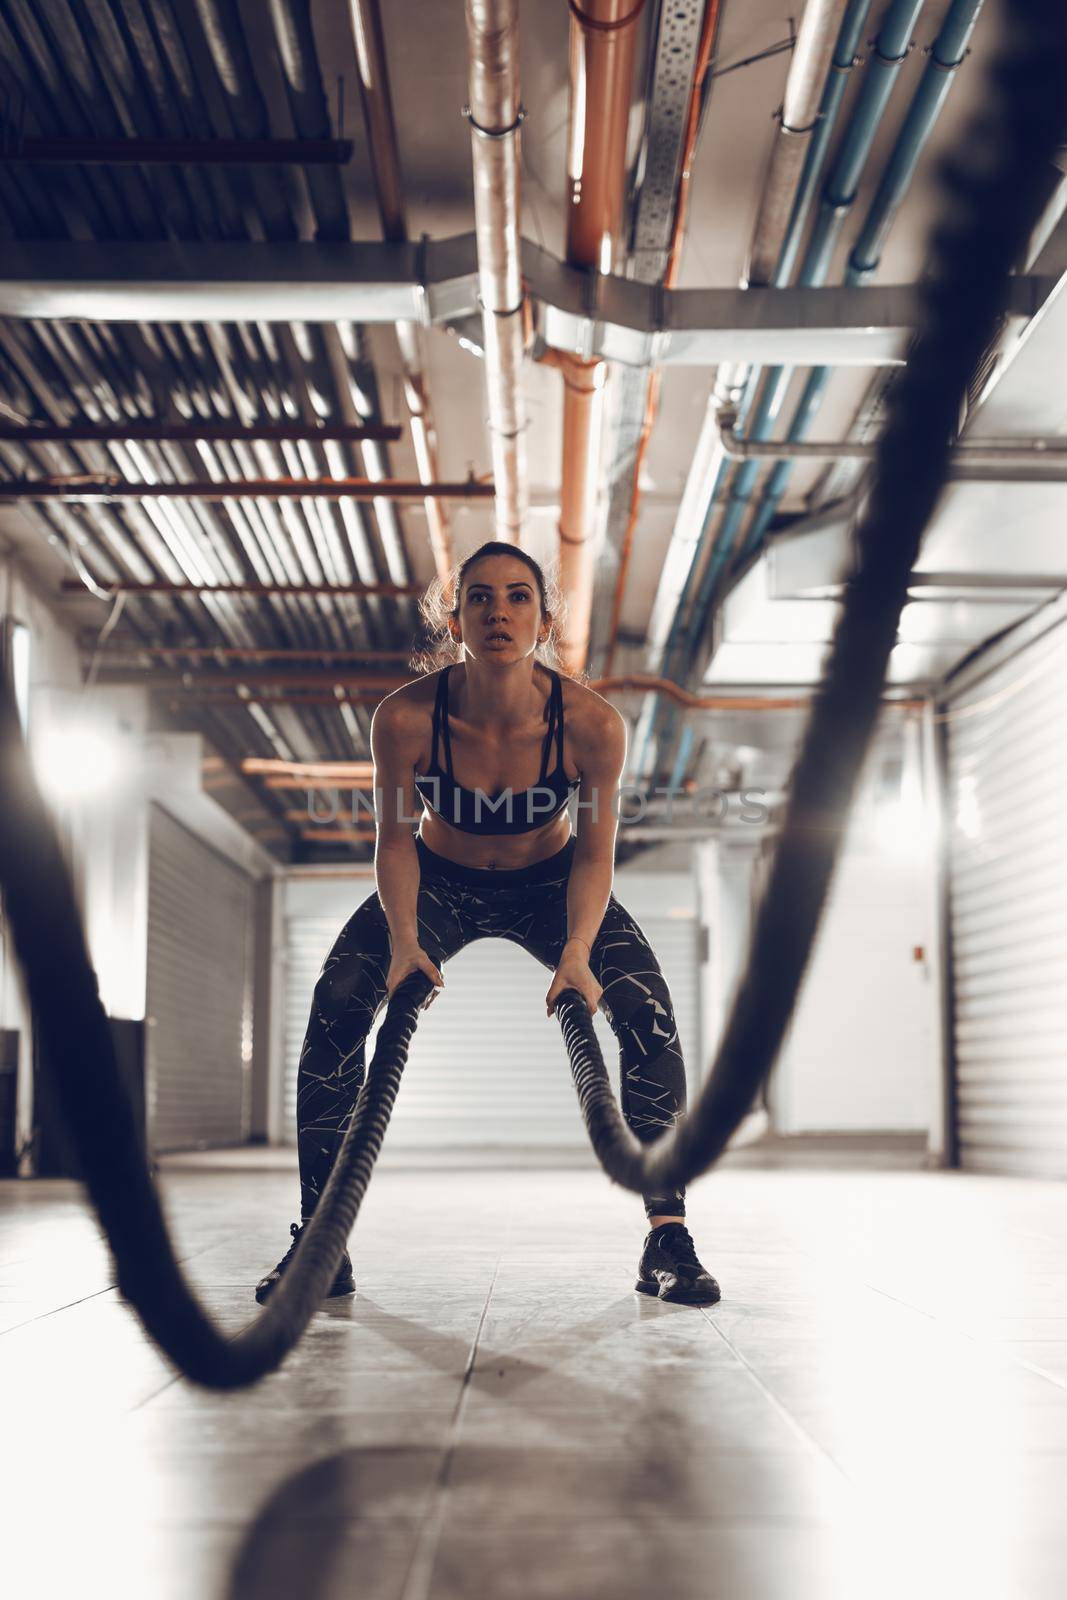 Muscular young woman exercising with ropes at the garage gym. Selective focus.